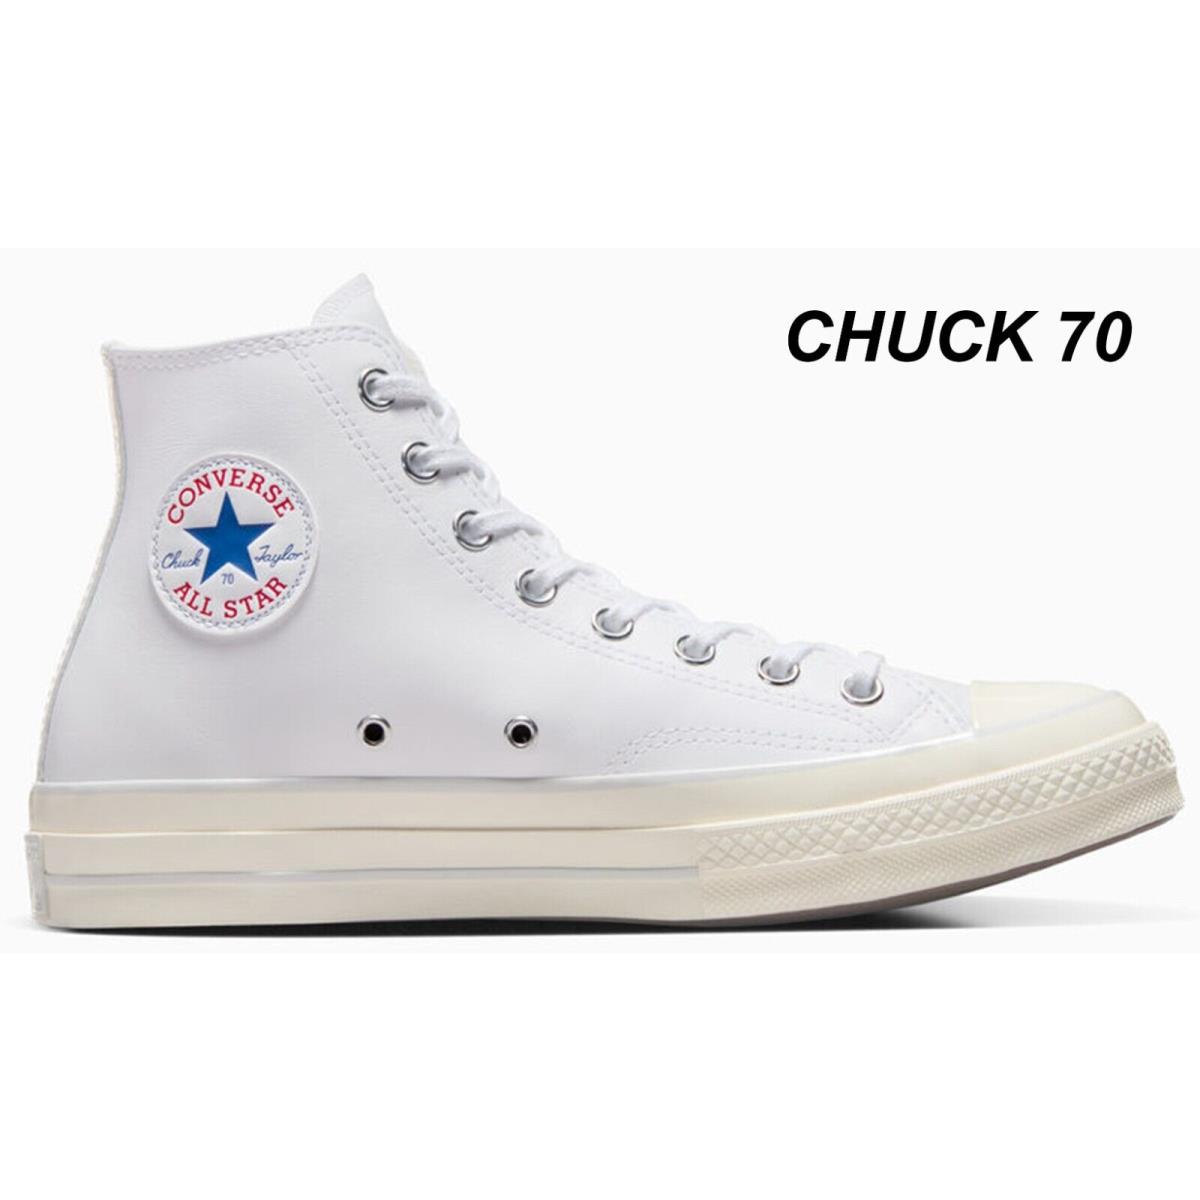 Converse Chuck 70 Premium Leather High Top Men`s Classic Shoes Ortholite Insole White